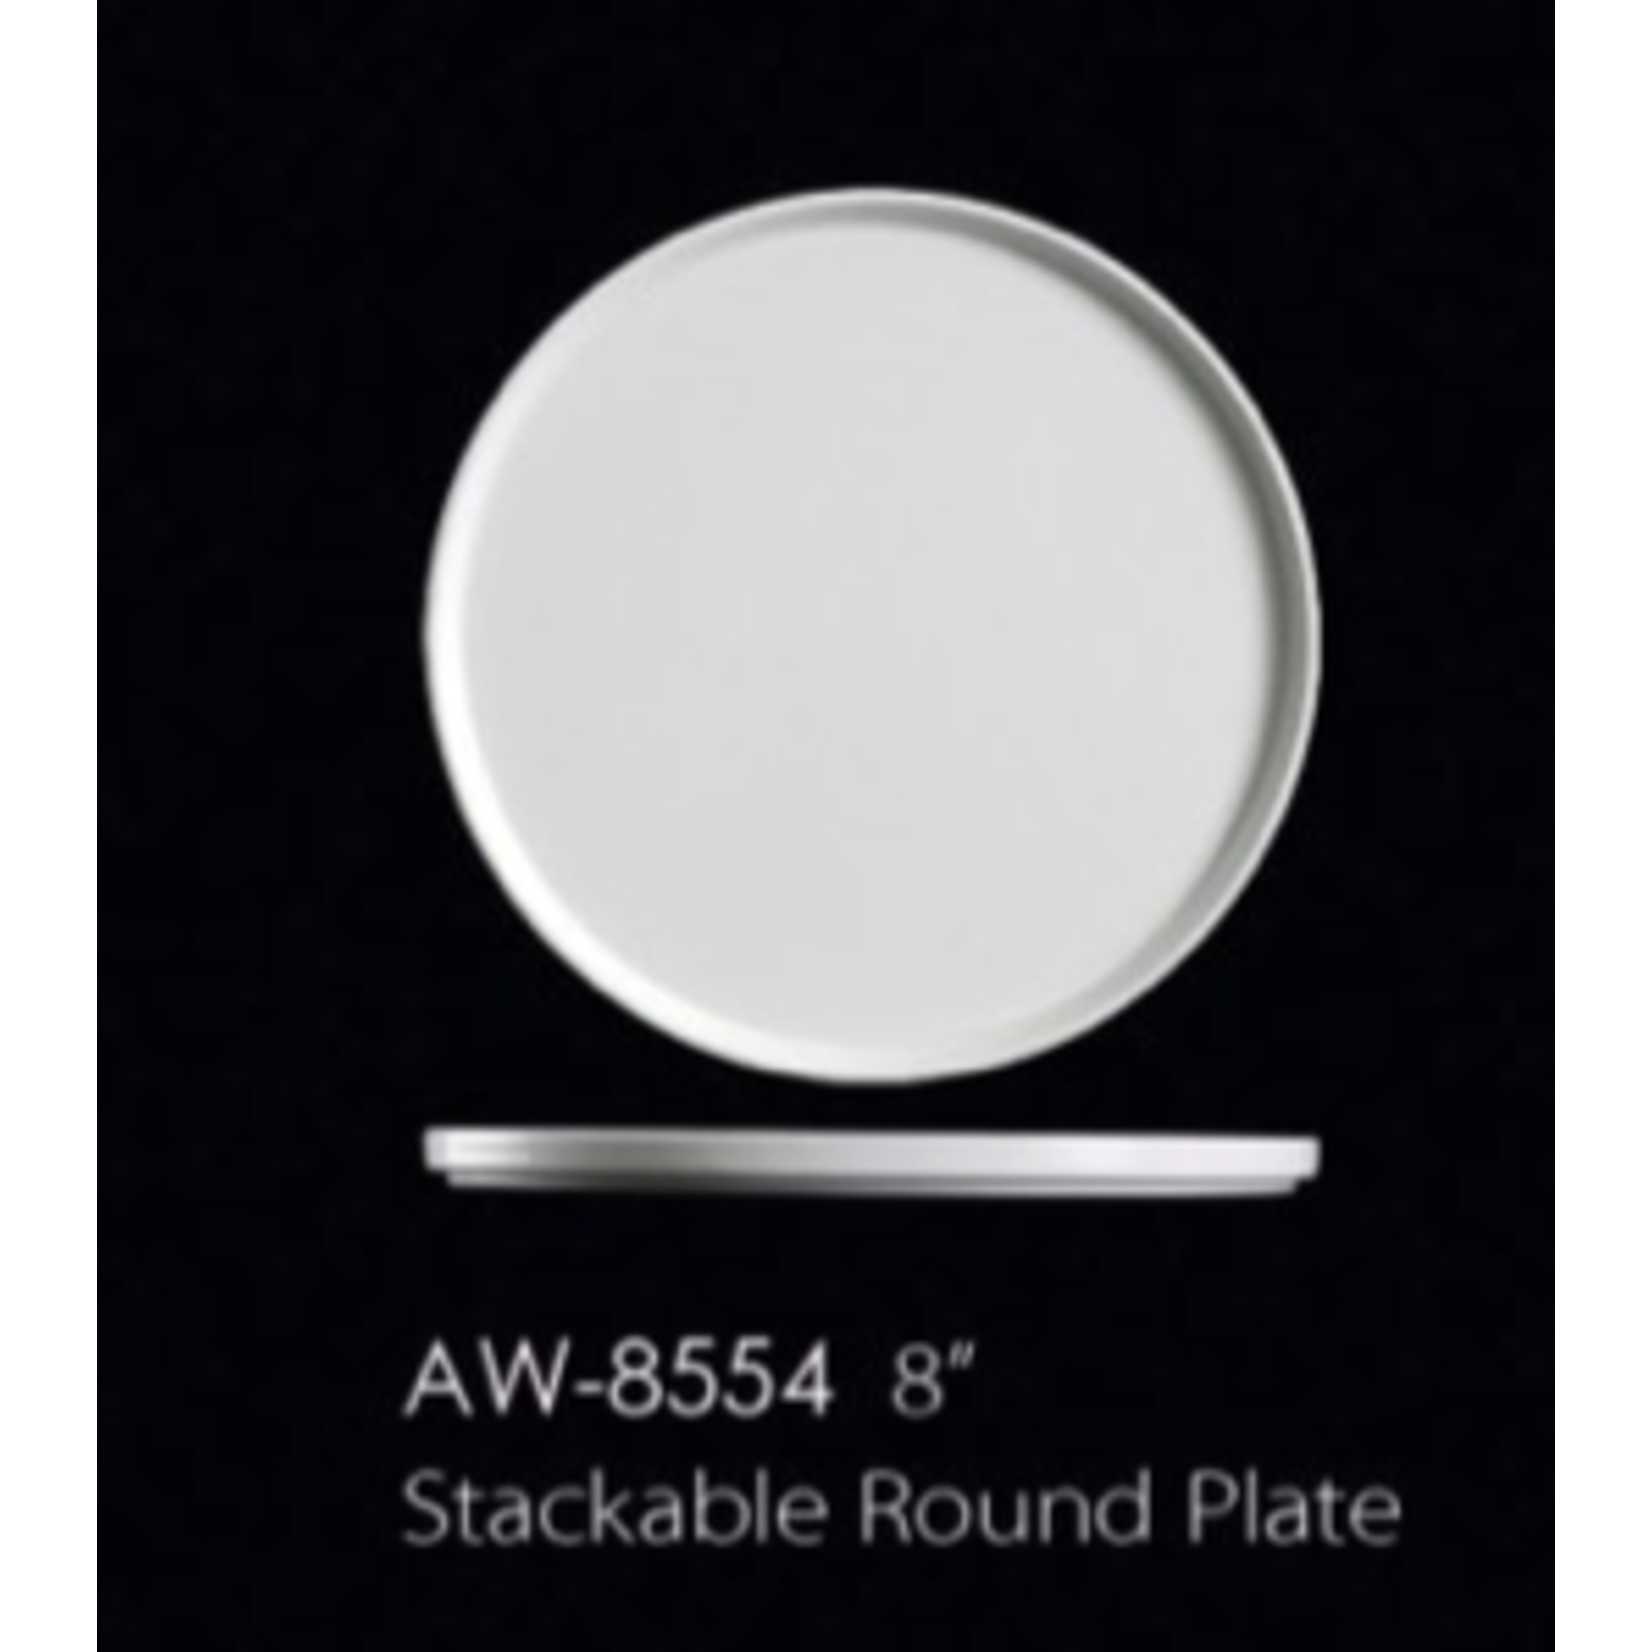 Palate and Plate AW-8554 8” Stackable Round Plate 24/cs white